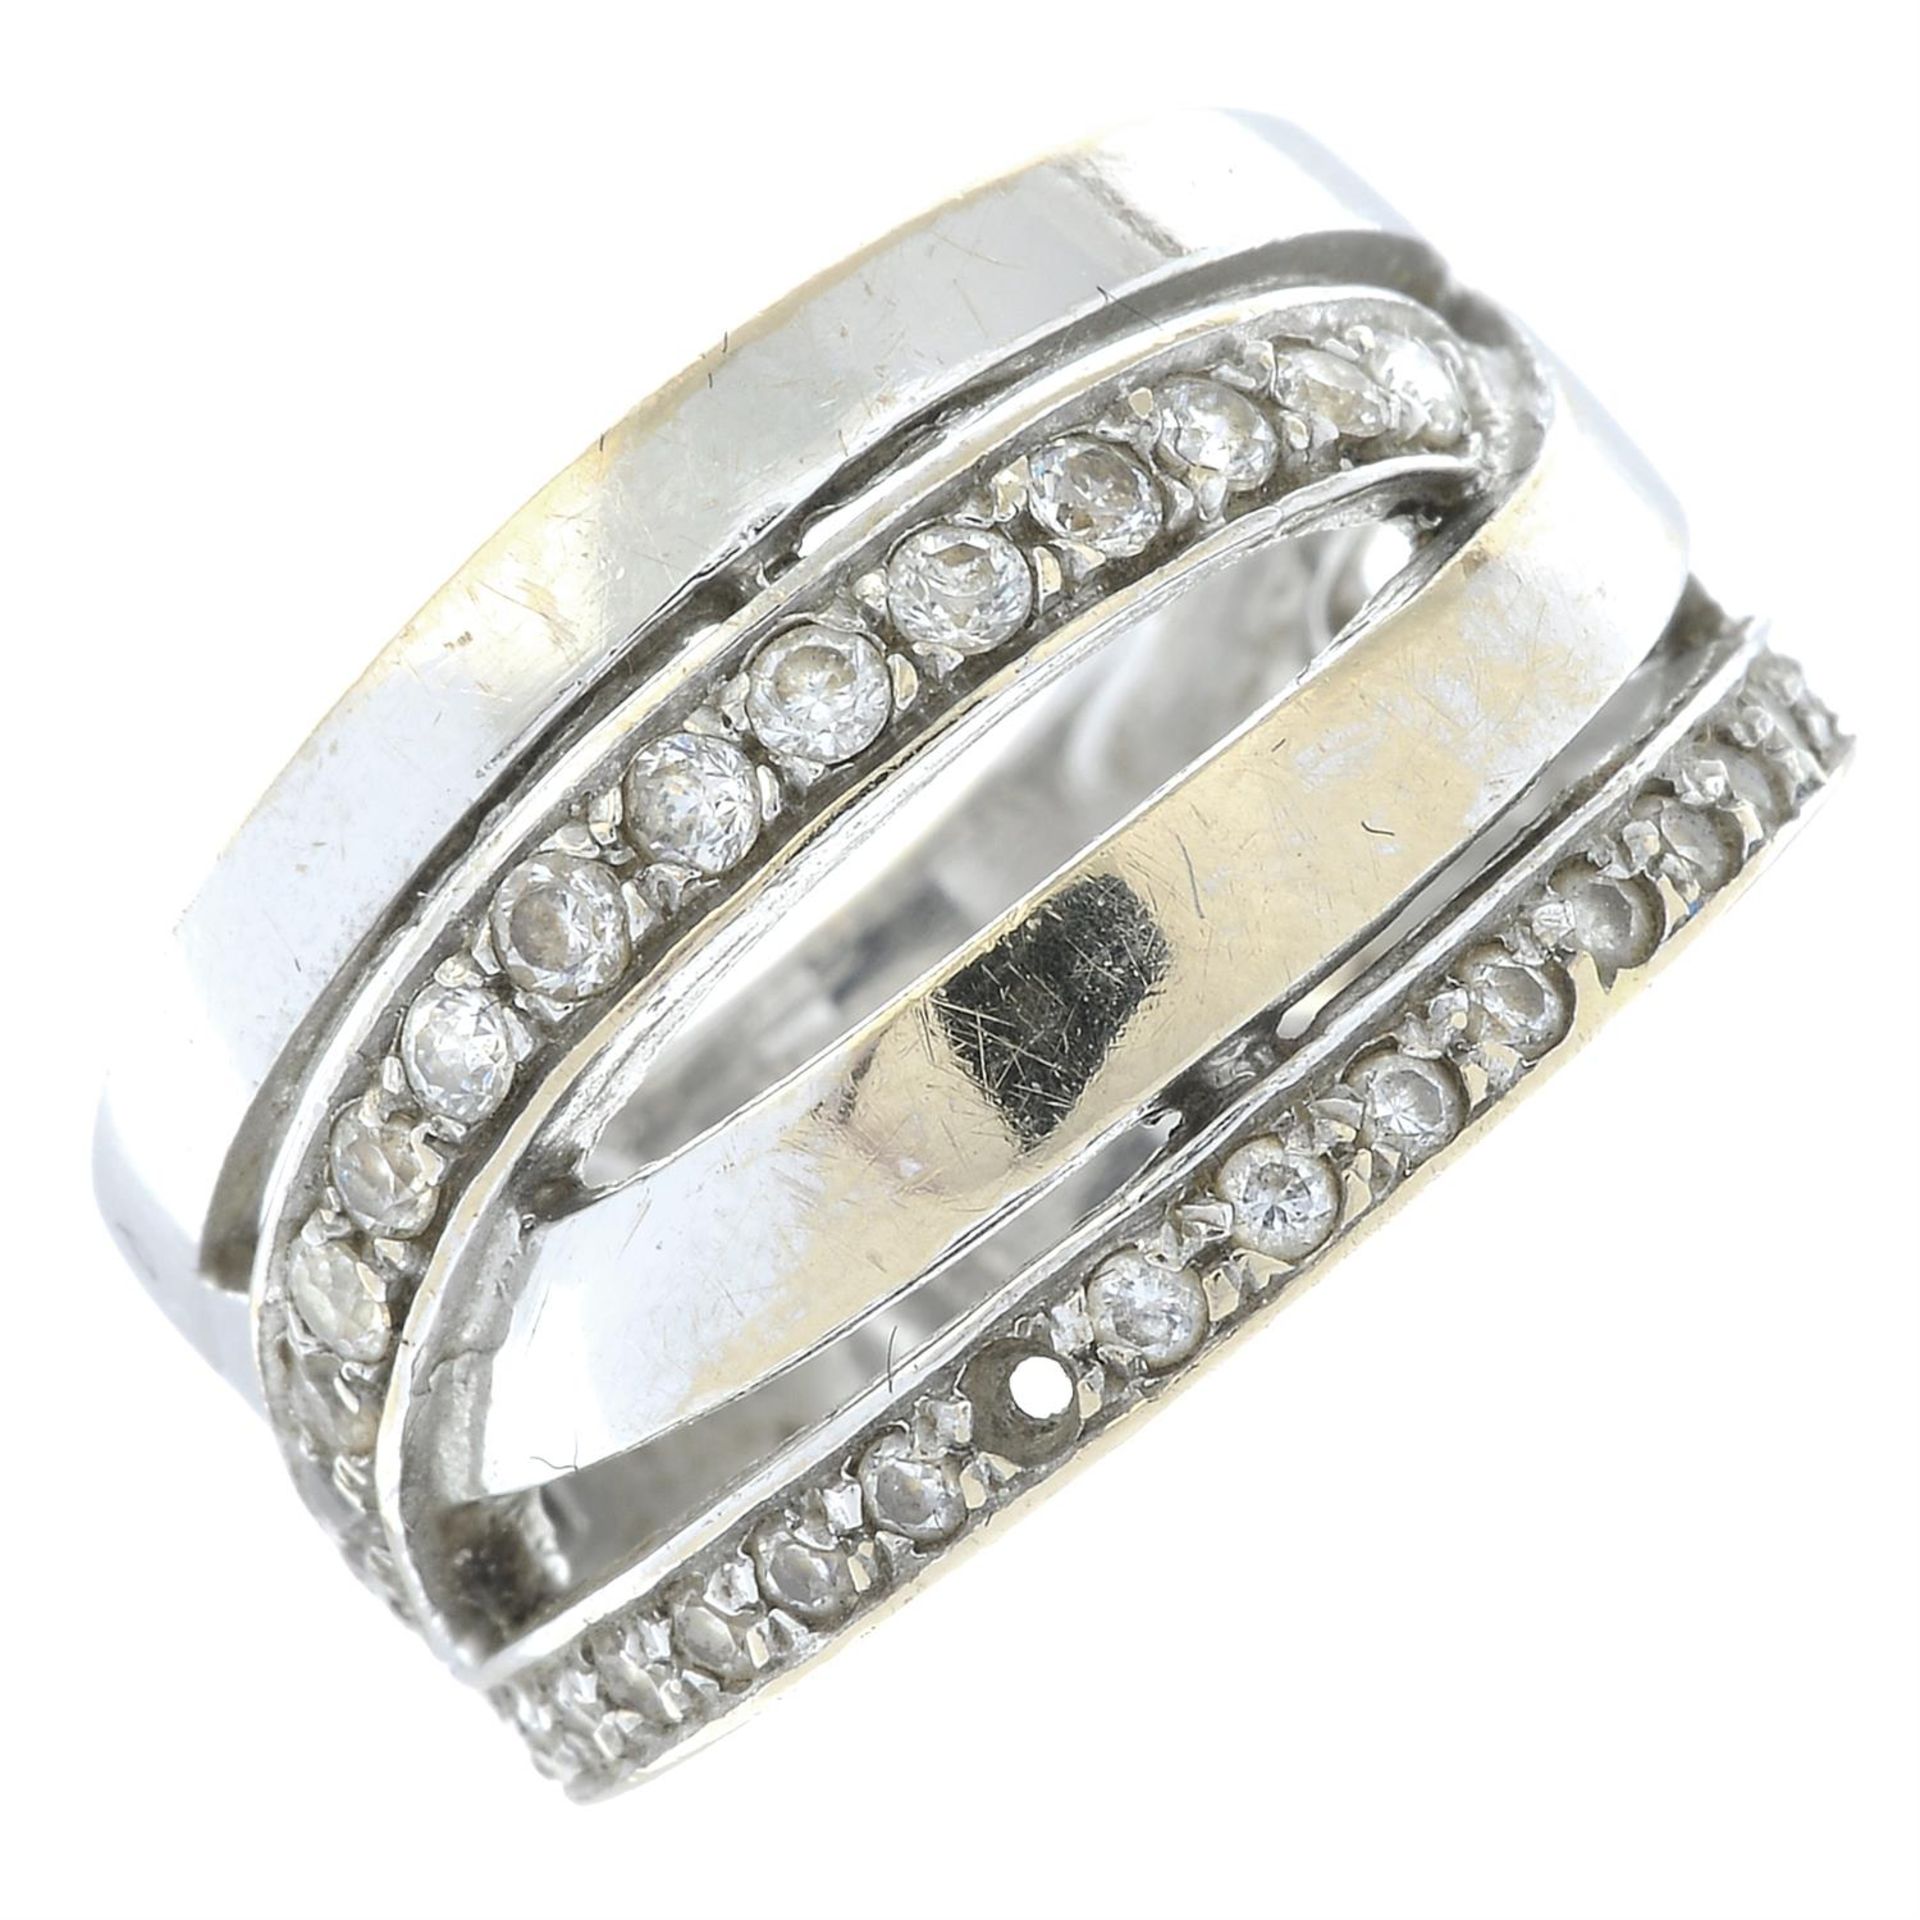 A cubic zirconia two-row overlapping ring.